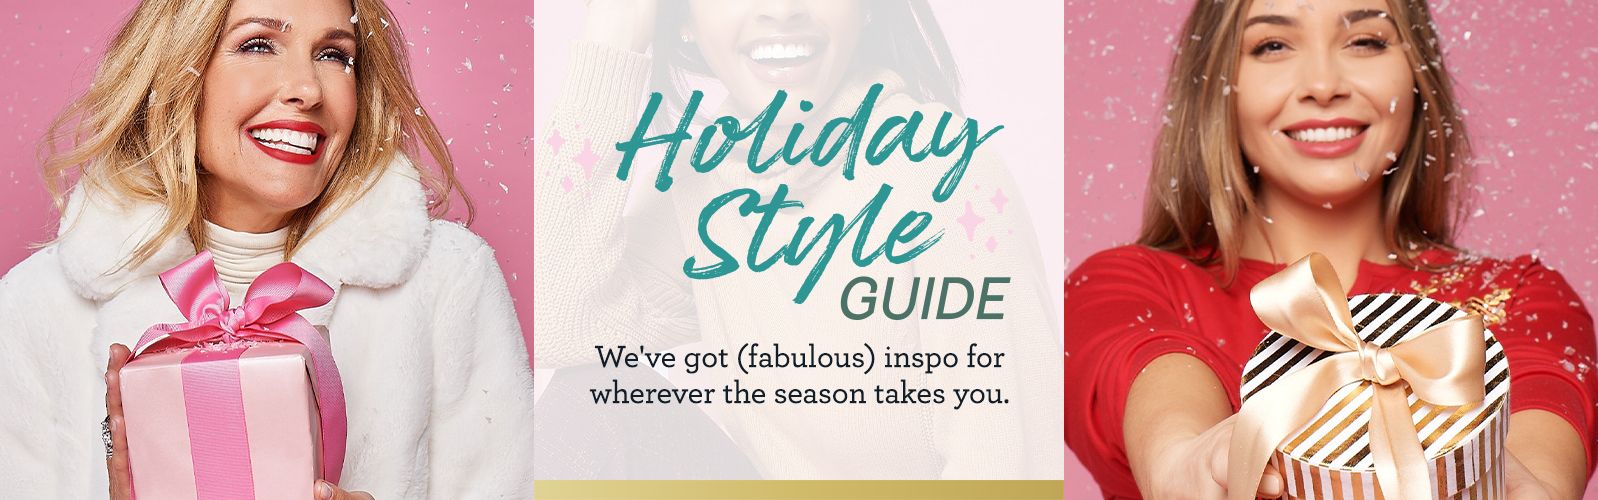 Holiday Style Guide     We've got (fabulous) inspo for wherever the season takes you.